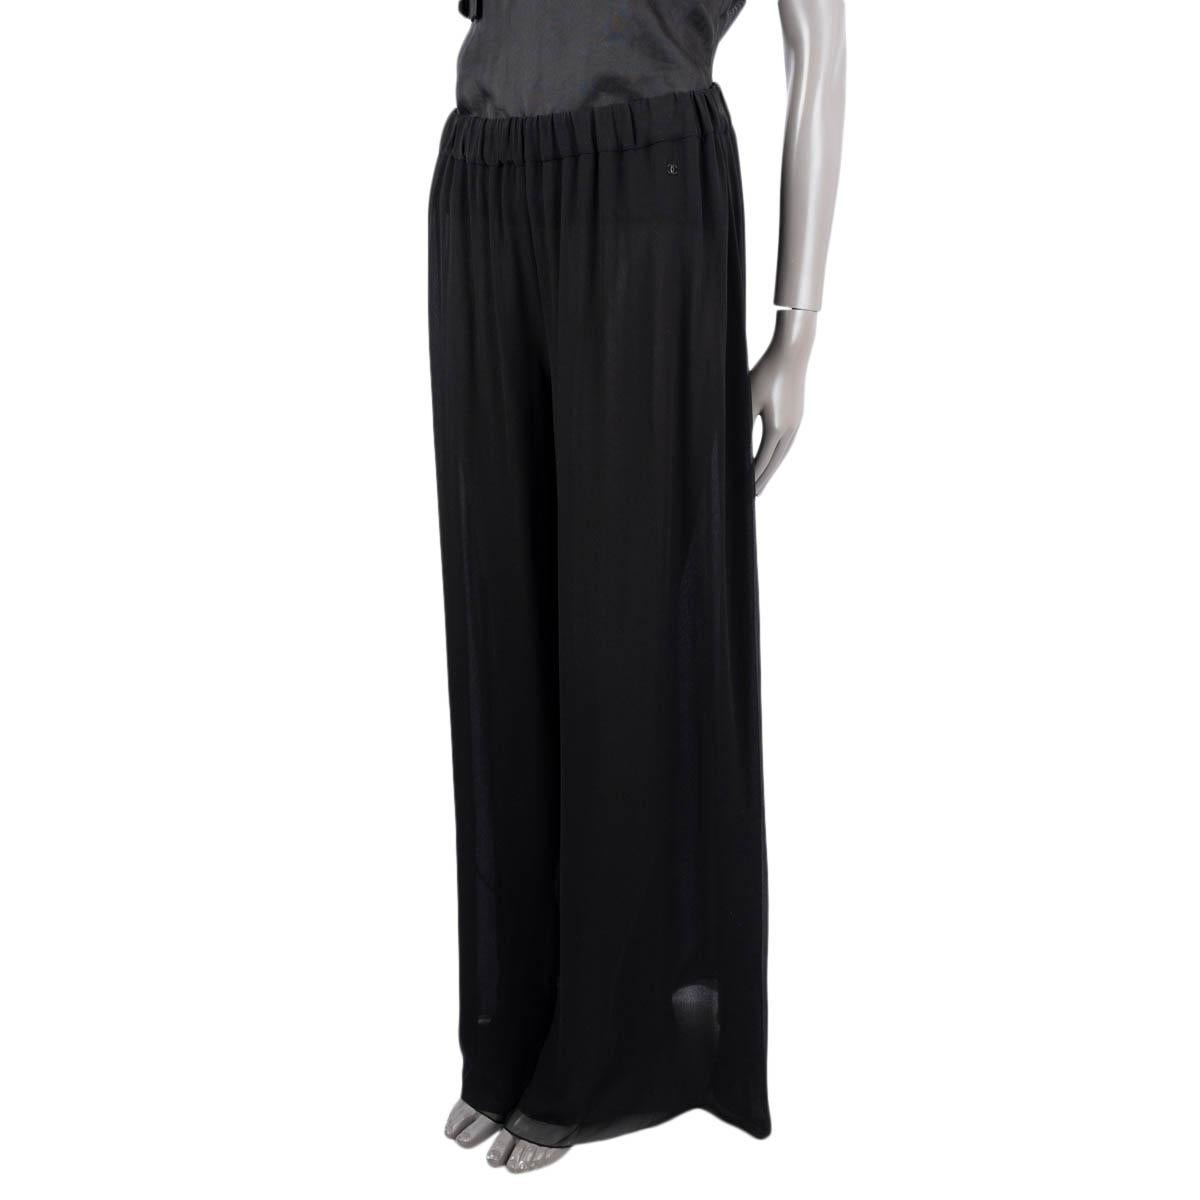 100% authentic Chanel palazzo chiffon pants in black silk (100%). The design features an elastic waistband, black silk (100%) lining and black logo metal tag. Have been worn and are in excellent condition. 

Measurements
Model	Chanel16A P54366